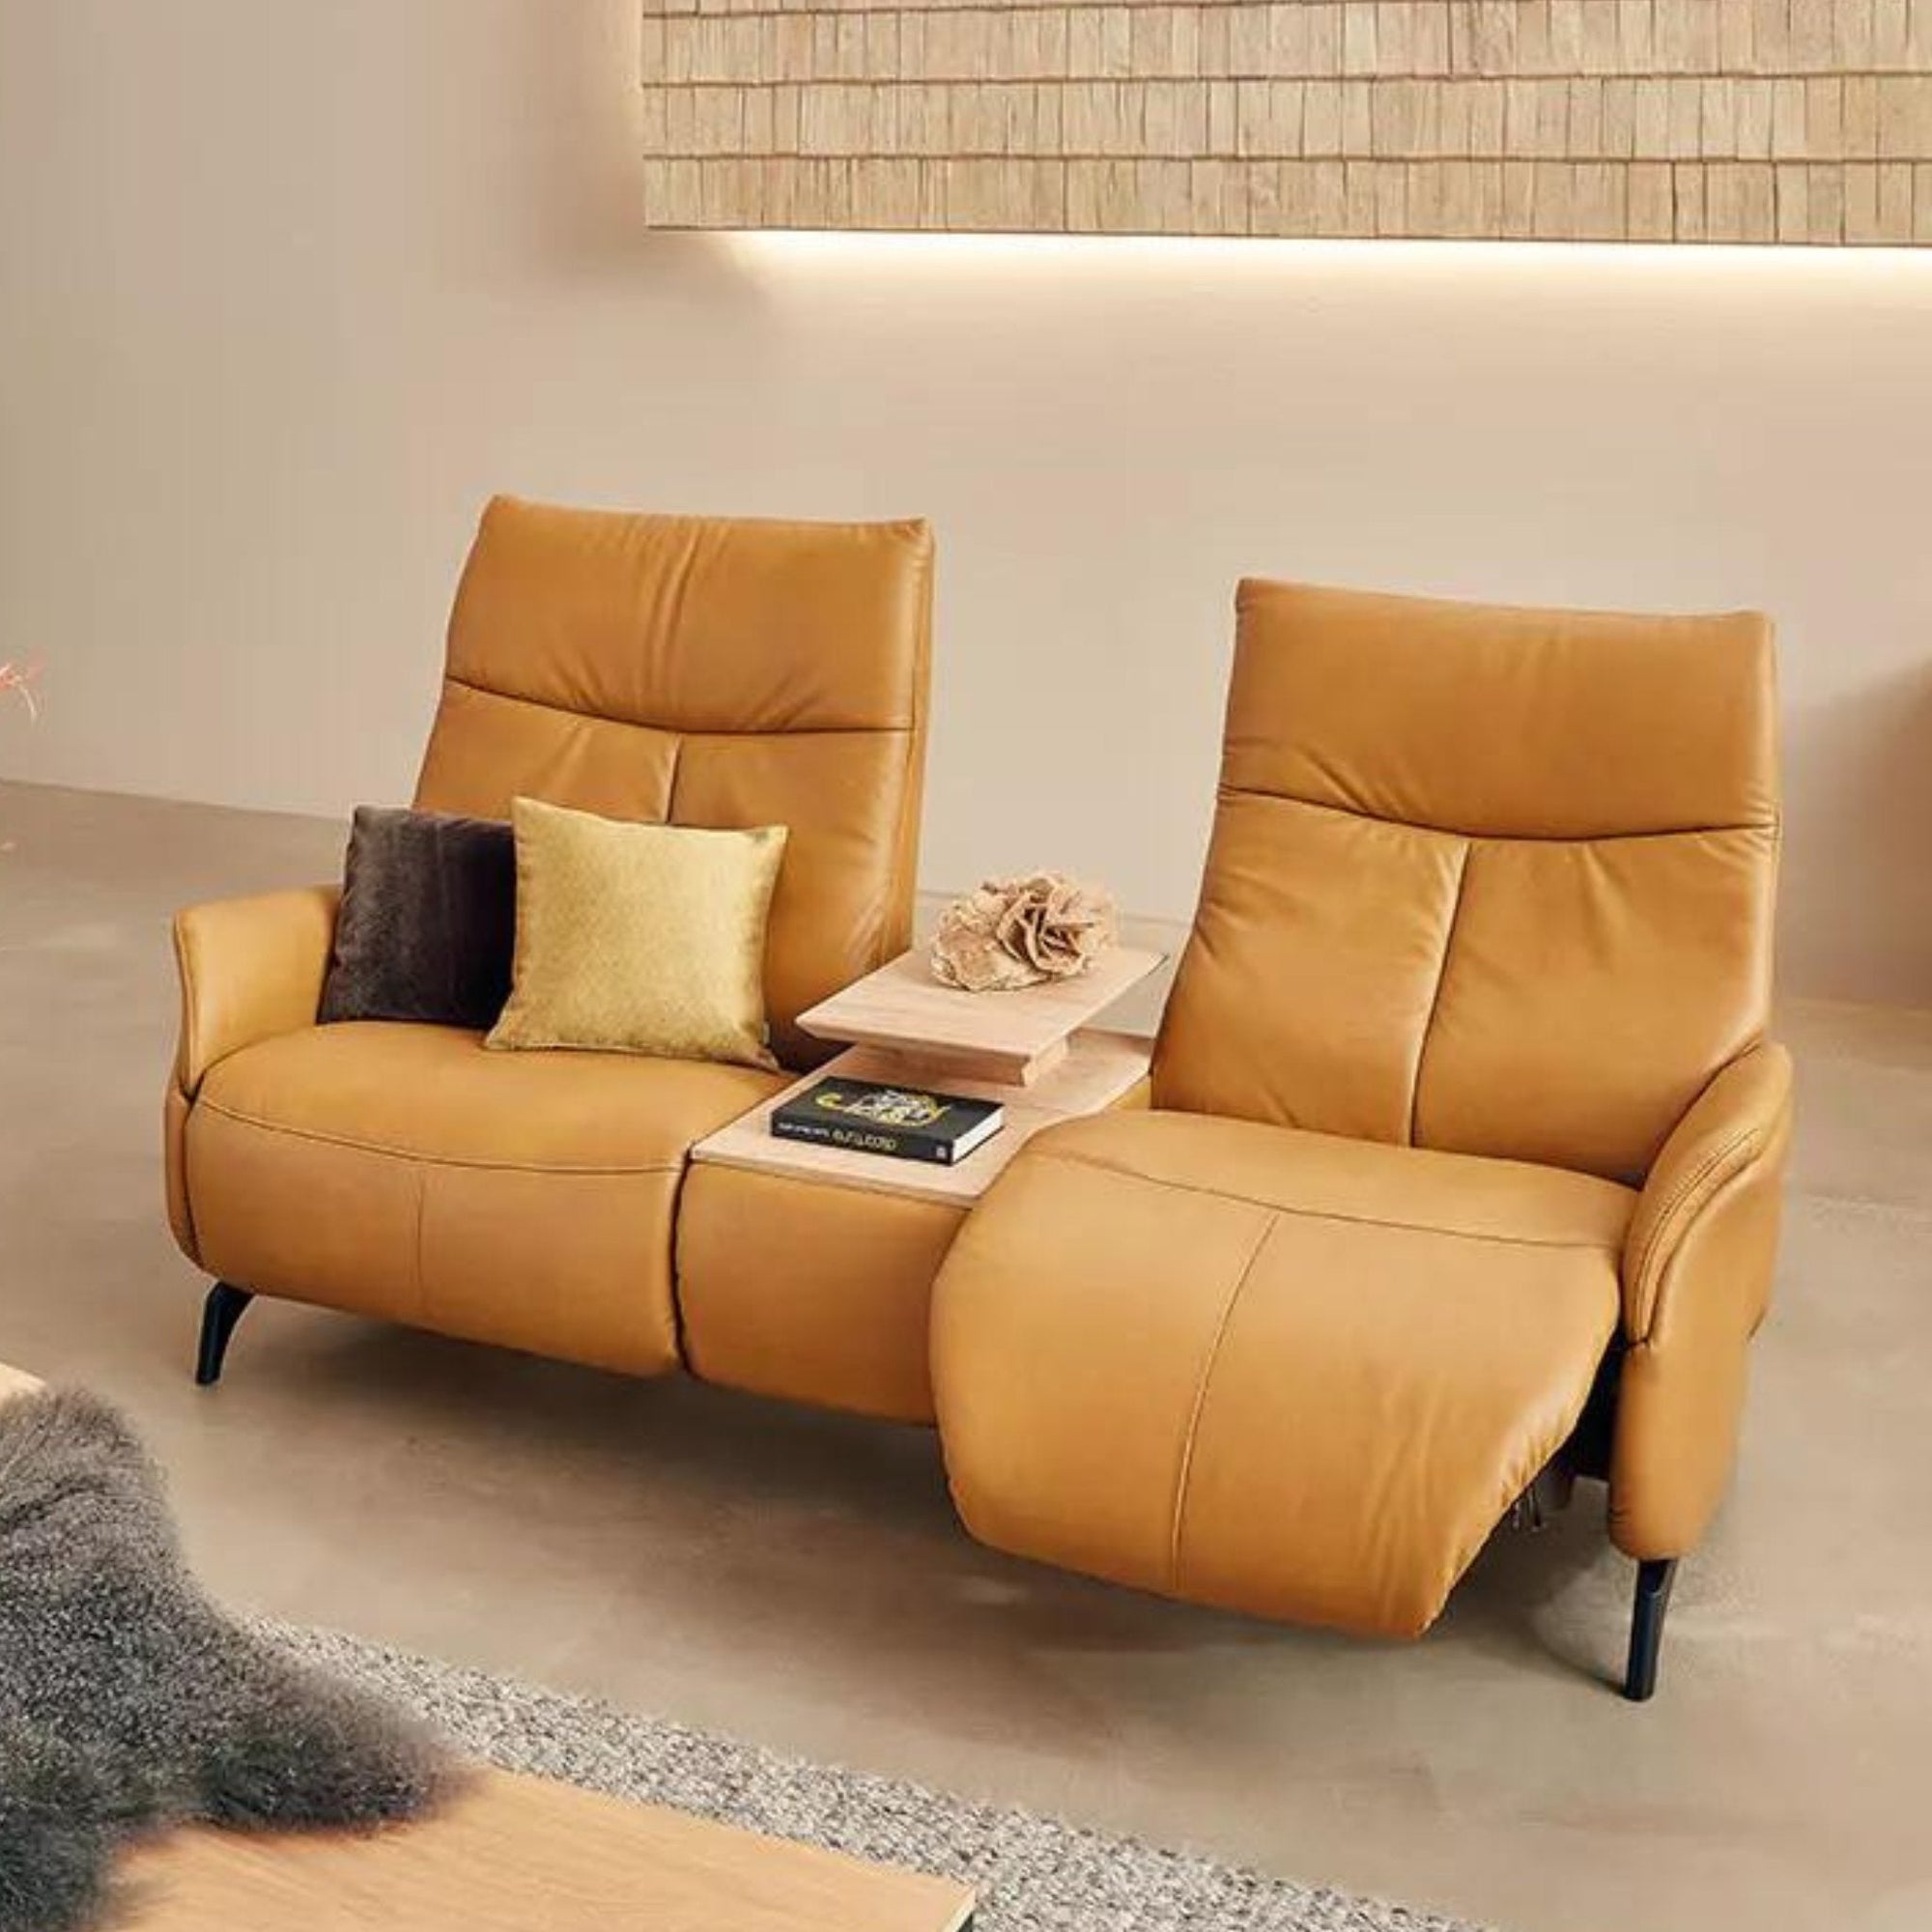 sofas and loveseat leather fabric portland oregon furniture stores